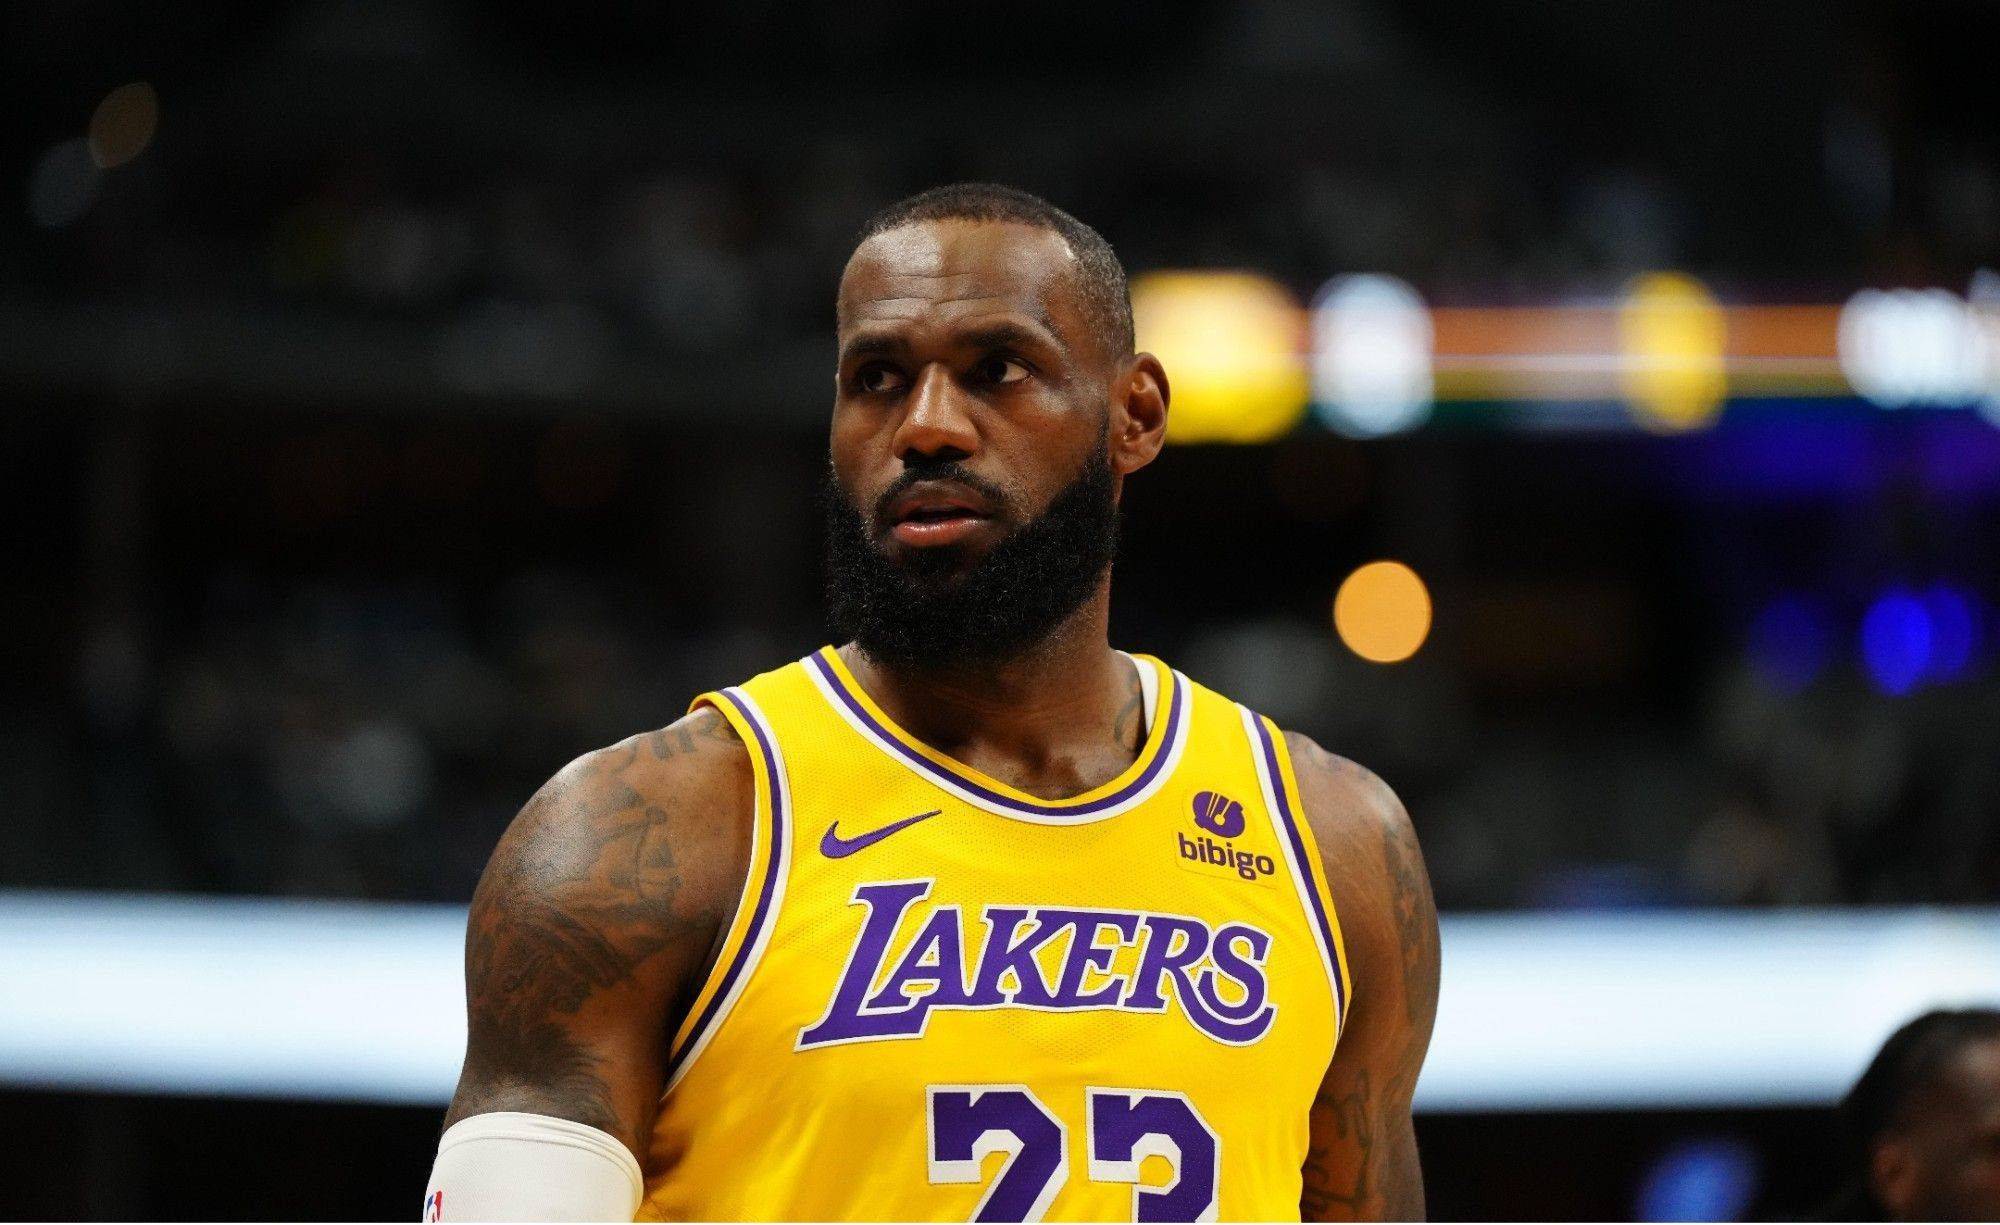 Insider: LeBron has a shot at another title, but not with the Lakers